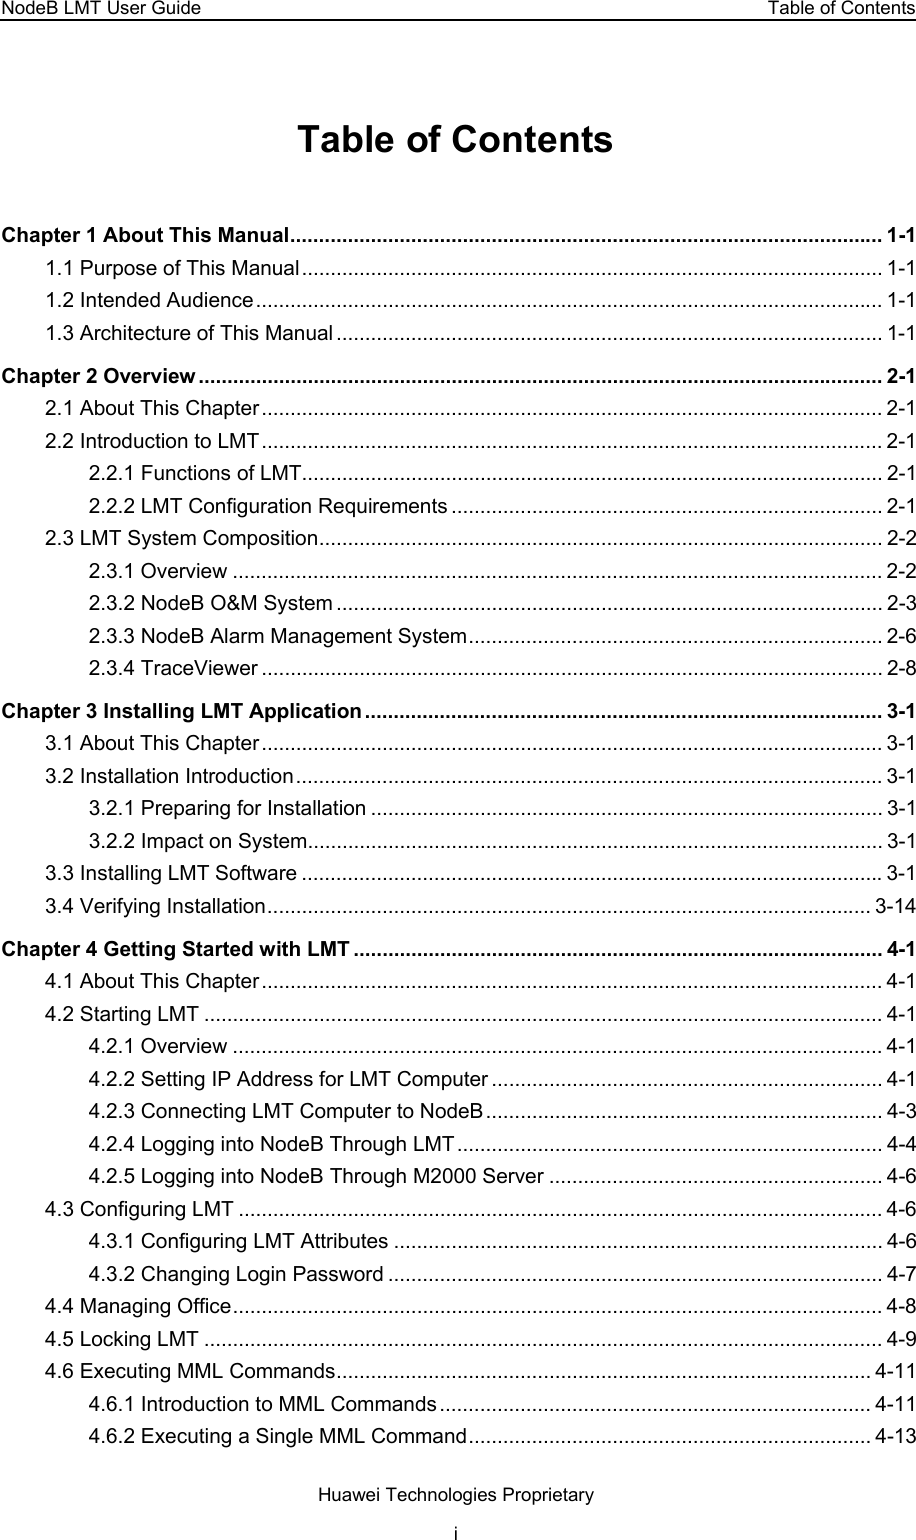 NodeB LMT User Guide  Table of Contents Table of Contents Chapter 1 About This Manual....................................................................................................... 1-1 1.1 Purpose of This Manual..................................................................................................... 1-1 1.2 Intended Audience............................................................................................................. 1-1 1.3 Architecture of This Manual ............................................................................................... 1-1 Chapter 2 Overview ....................................................................................................................... 2-1 2.1 About This Chapter............................................................................................................ 2-1 2.2 Introduction to LMT............................................................................................................ 2-1 2.2.1 Functions of LMT..................................................................................................... 2-1 2.2.2 LMT Configuration Requirements ........................................................................... 2-1 2.3 LMT System Composition.................................................................................................. 2-2 2.3.1 Overview ................................................................................................................. 2-2 2.3.2 NodeB O&amp;M System ............................................................................................... 2-3 2.3.3 NodeB Alarm Management System........................................................................ 2-6 2.3.4 TraceViewer ............................................................................................................ 2-8 Chapter 3 Installing LMT Application.......................................................................................... 3-1 3.1 About This Chapter............................................................................................................ 3-1 3.2 Installation Introduction...................................................................................................... 3-1 3.2.1 Preparing for Installation ......................................................................................... 3-1 3.2.2 Impact on System.................................................................................................... 3-1 3.3 Installing LMT Software .....................................................................................................3-1 3.4 Verifying Installation......................................................................................................... 3-14 Chapter 4 Getting Started with LMT ............................................................................................ 4-1 4.1 About This Chapter............................................................................................................ 4-1 4.2 Starting LMT ...................................................................................................................... 4-1 4.2.1 Overview ................................................................................................................. 4-1 4.2.2 Setting IP Address for LMT Computer .................................................................... 4-1 4.2.3 Connecting LMT Computer to NodeB..................................................................... 4-3 4.2.4 Logging into NodeB Through LMT.......................................................................... 4-4 4.2.5 Logging into NodeB Through M2000 Server .......................................................... 4-6 4.3 Configuring LMT ................................................................................................................ 4-6 4.3.1 Configuring LMT Attributes ..................................................................................... 4-6 4.3.2 Changing Login Password ...................................................................................... 4-7 4.4 Managing Office................................................................................................................. 4-8 4.5 Locking LMT ...................................................................................................................... 4-9 4.6 Executing MML Commands............................................................................................. 4-11 4.6.1 Introduction to MML Commands ........................................................................... 4-11 4.6.2 Executing a Single MML Command...................................................................... 4-13 Huawei Technologies Proprietary i 